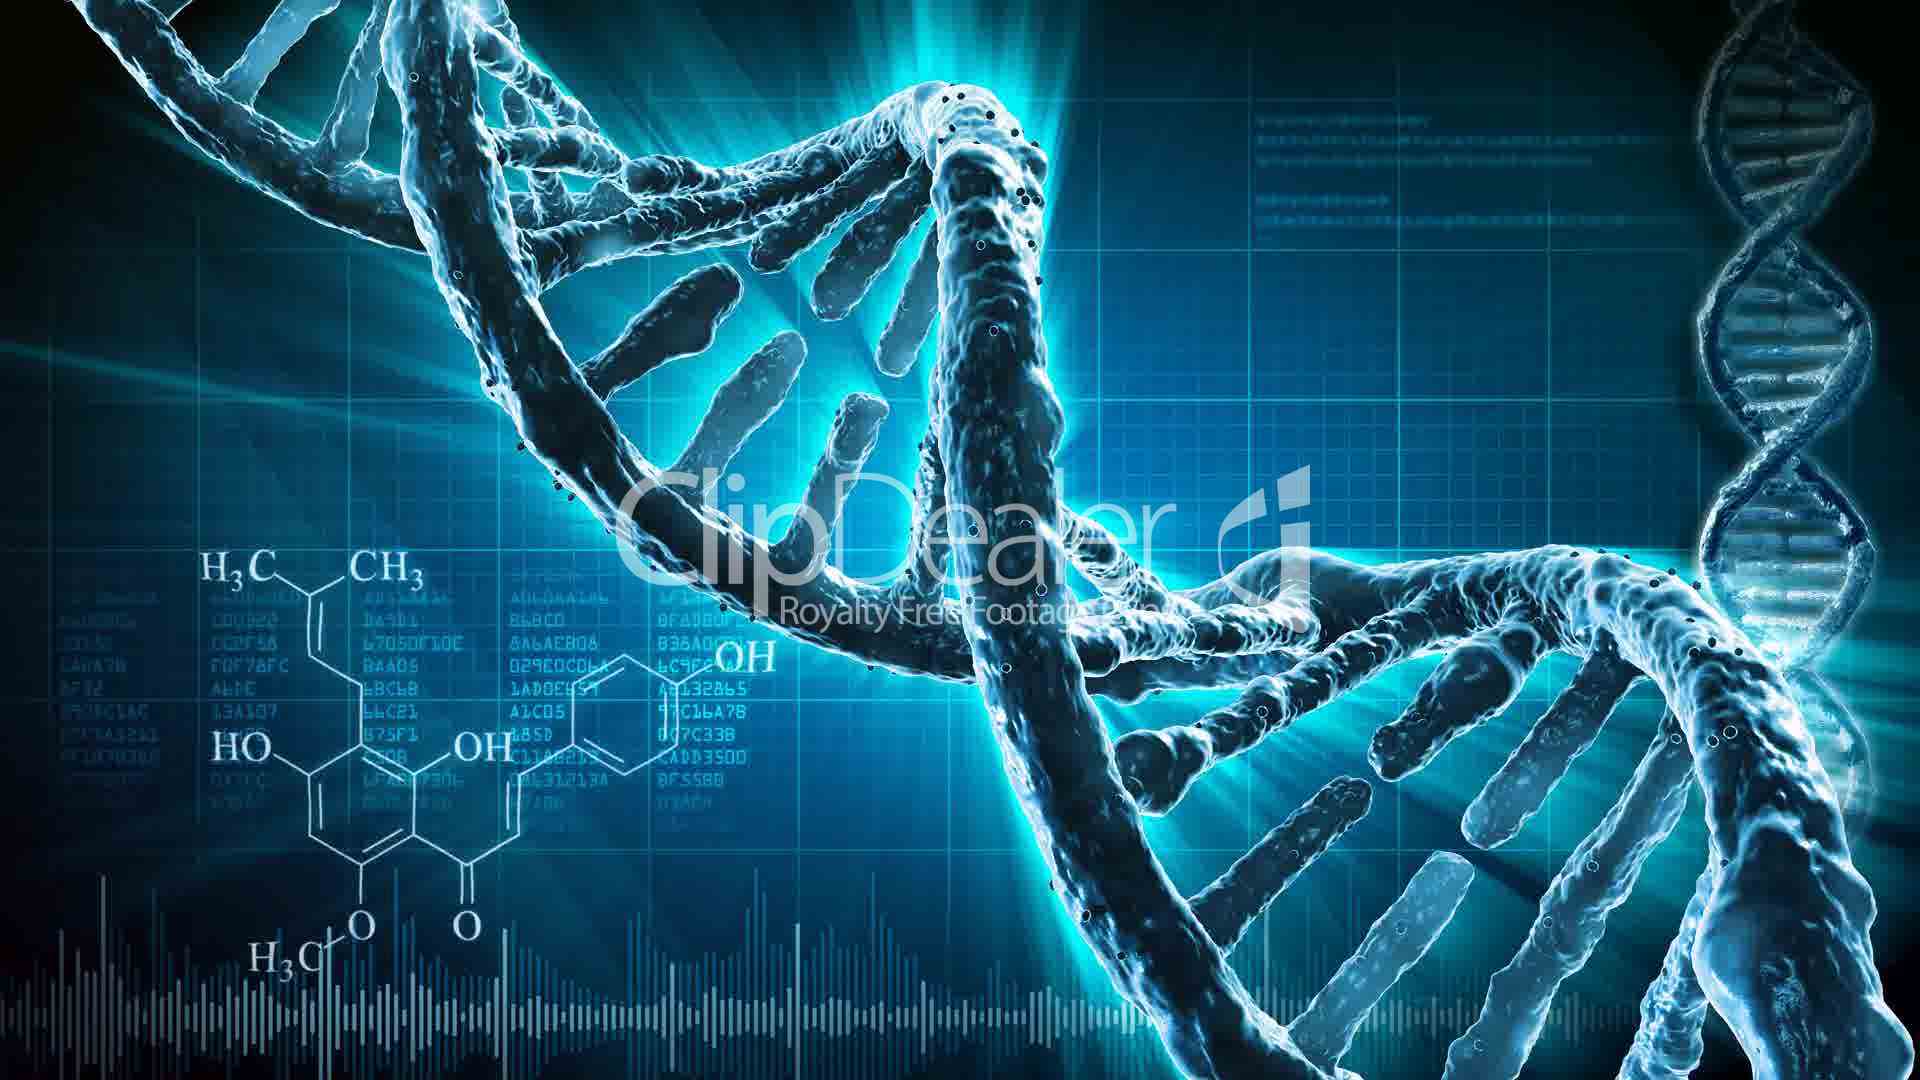 Dna Wallpaper Hd Design Ideas Dna Wallpaper Android Large Hd 1920x1080